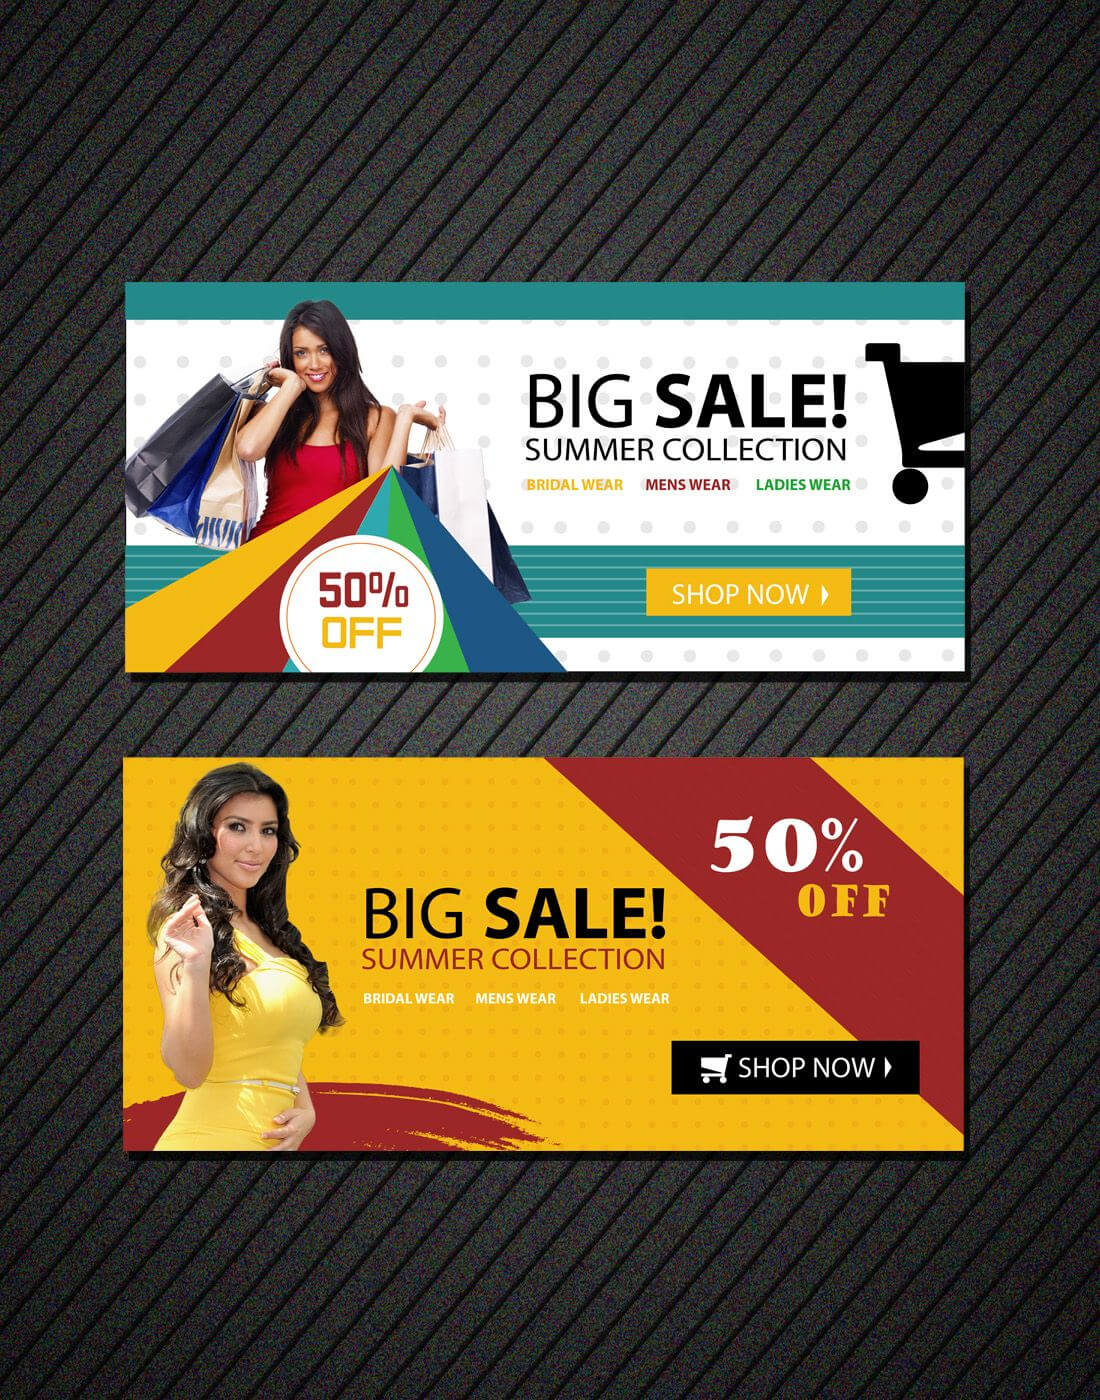 Online Shopping Banners Templates | Free Website Psd Banners Intended For Free Online Banner Templates